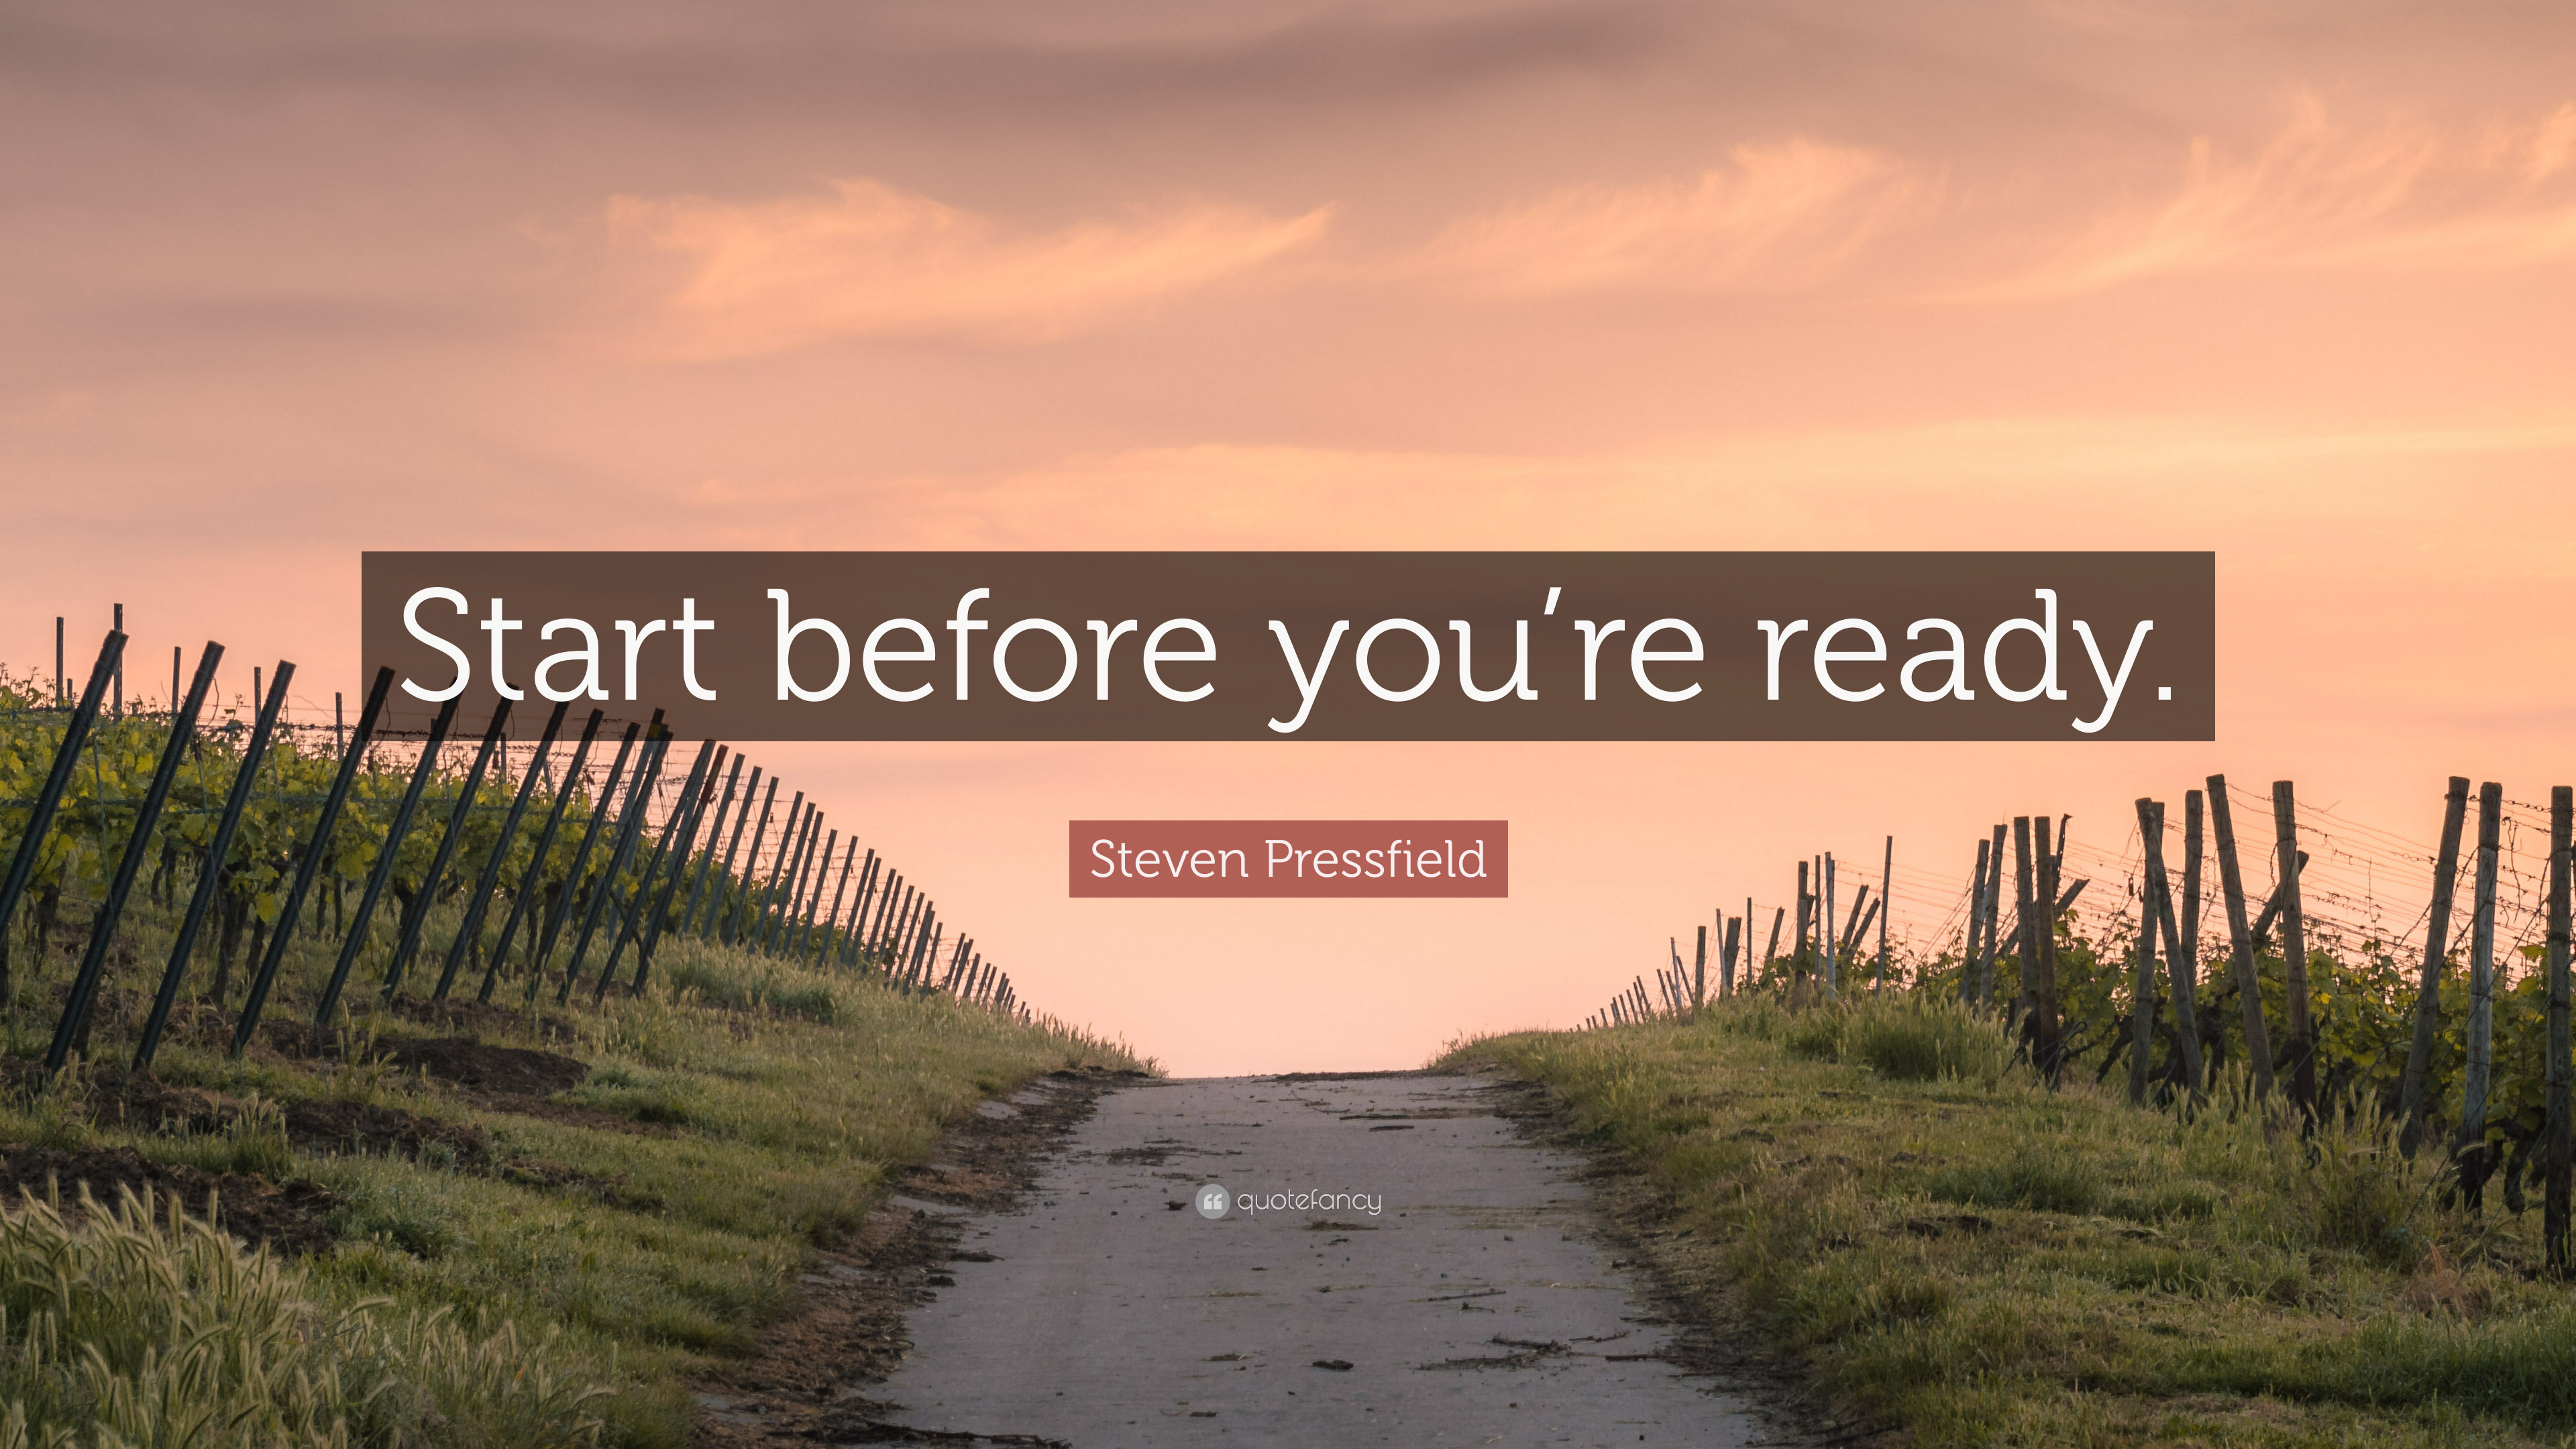 Steven Pressfield Quote: “Start before you're ready.” 9 wallpaper